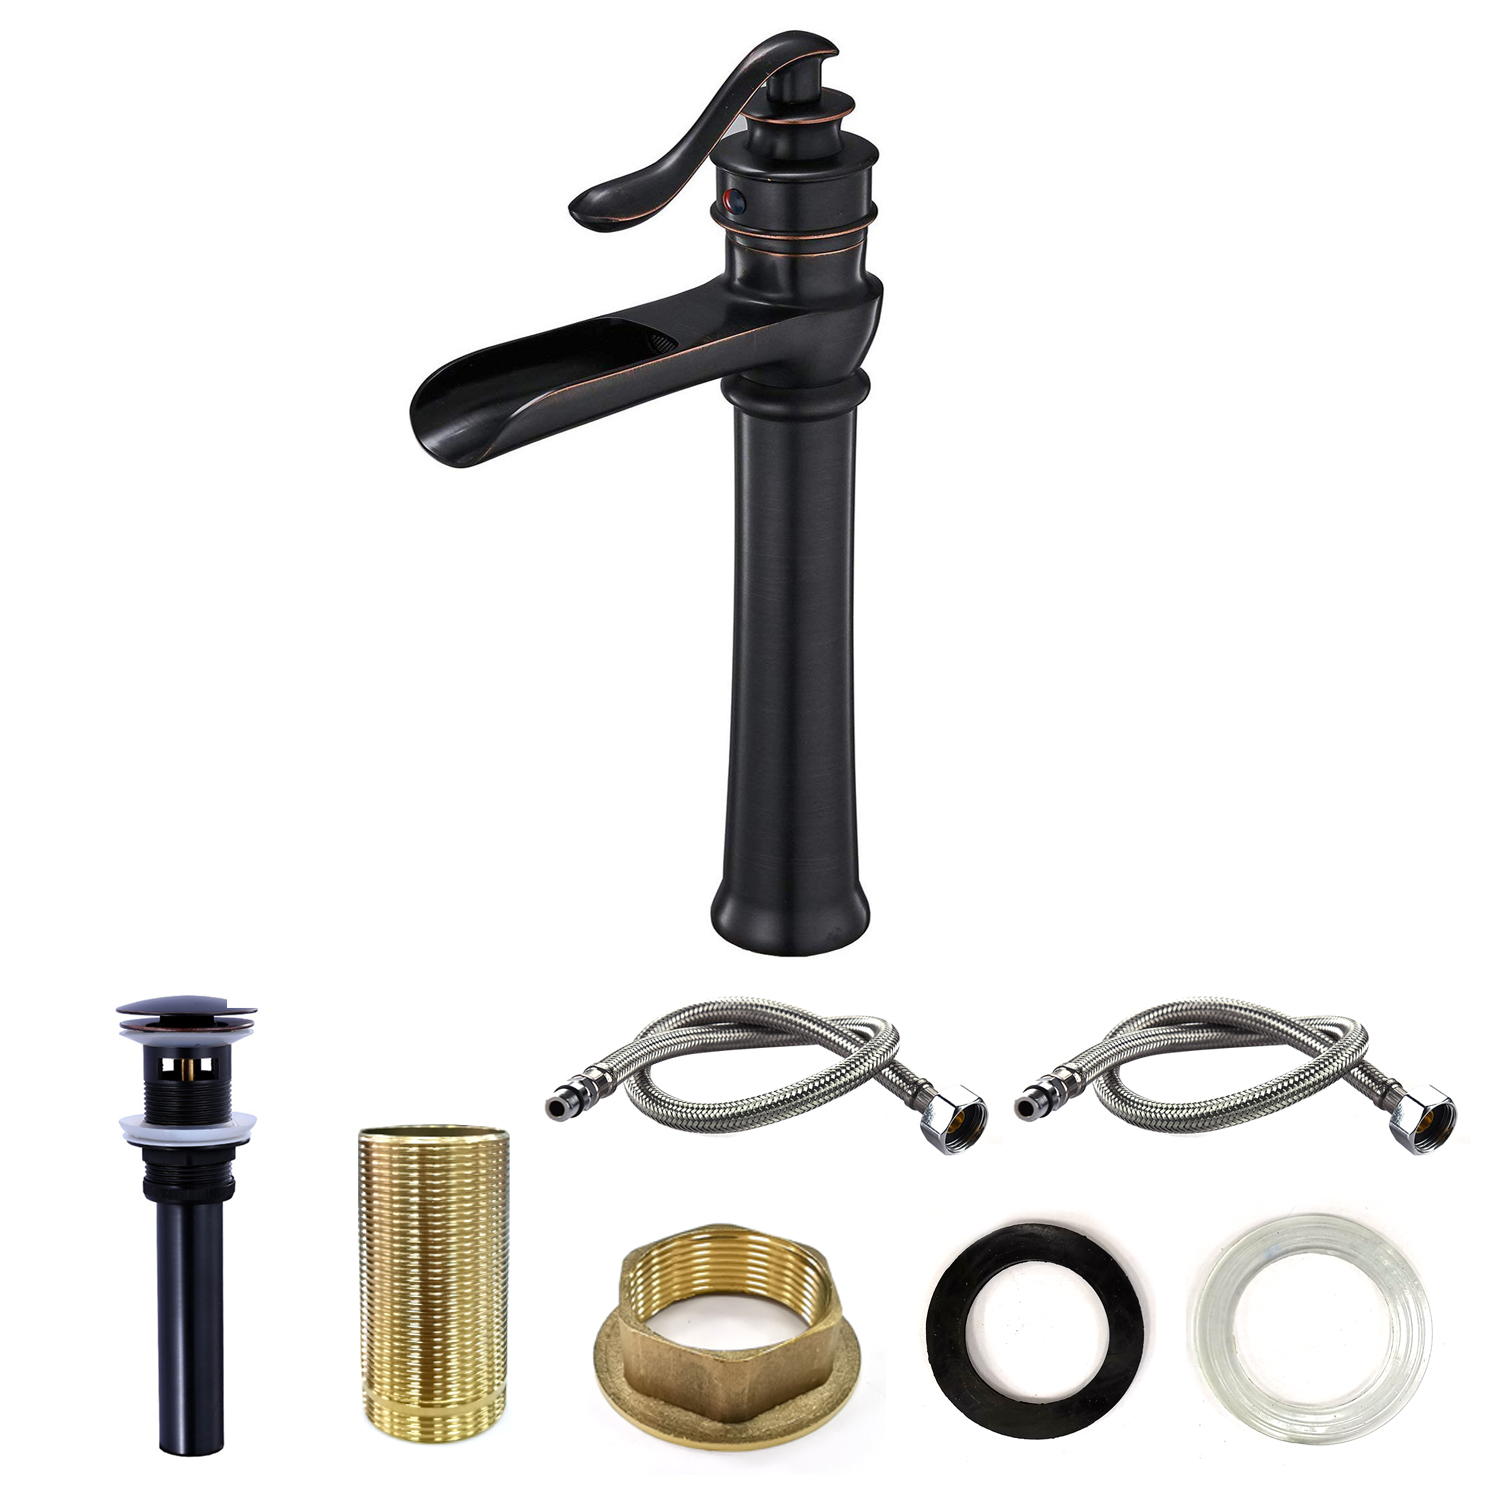 Waterfall Spout Oil Rubbed Bronze Bathroom Faucet Deck Mounted Vessel Sink Single Lever Handle Commercial Basin Mixer Tap Faucet One Hole